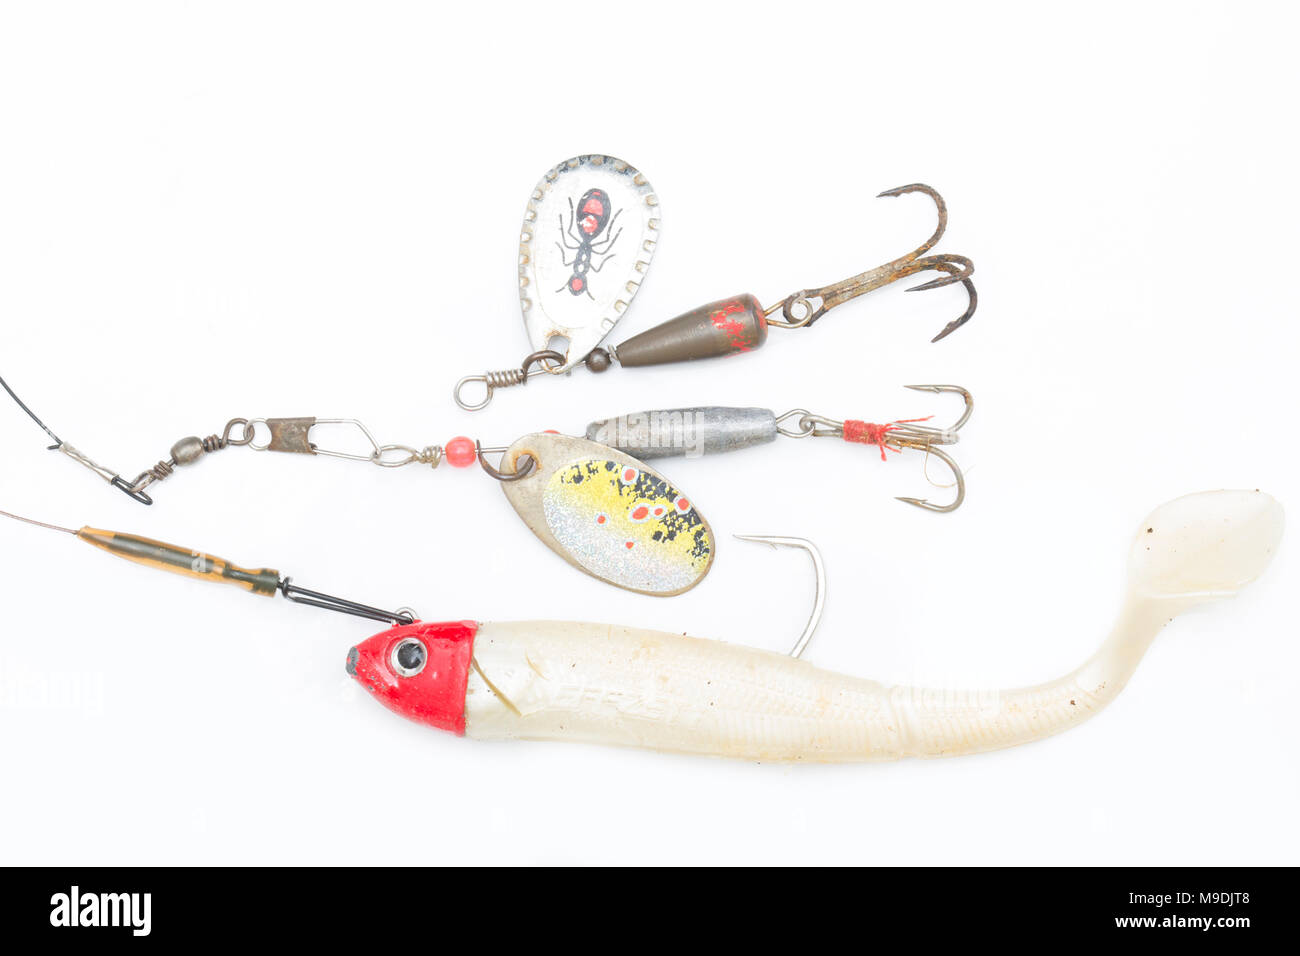 Fishing lures found magnet fishing, which involves tying a powerful magnet to a rope, throwing it into lakes or canals and dragging it back-and seeing Stock Photo